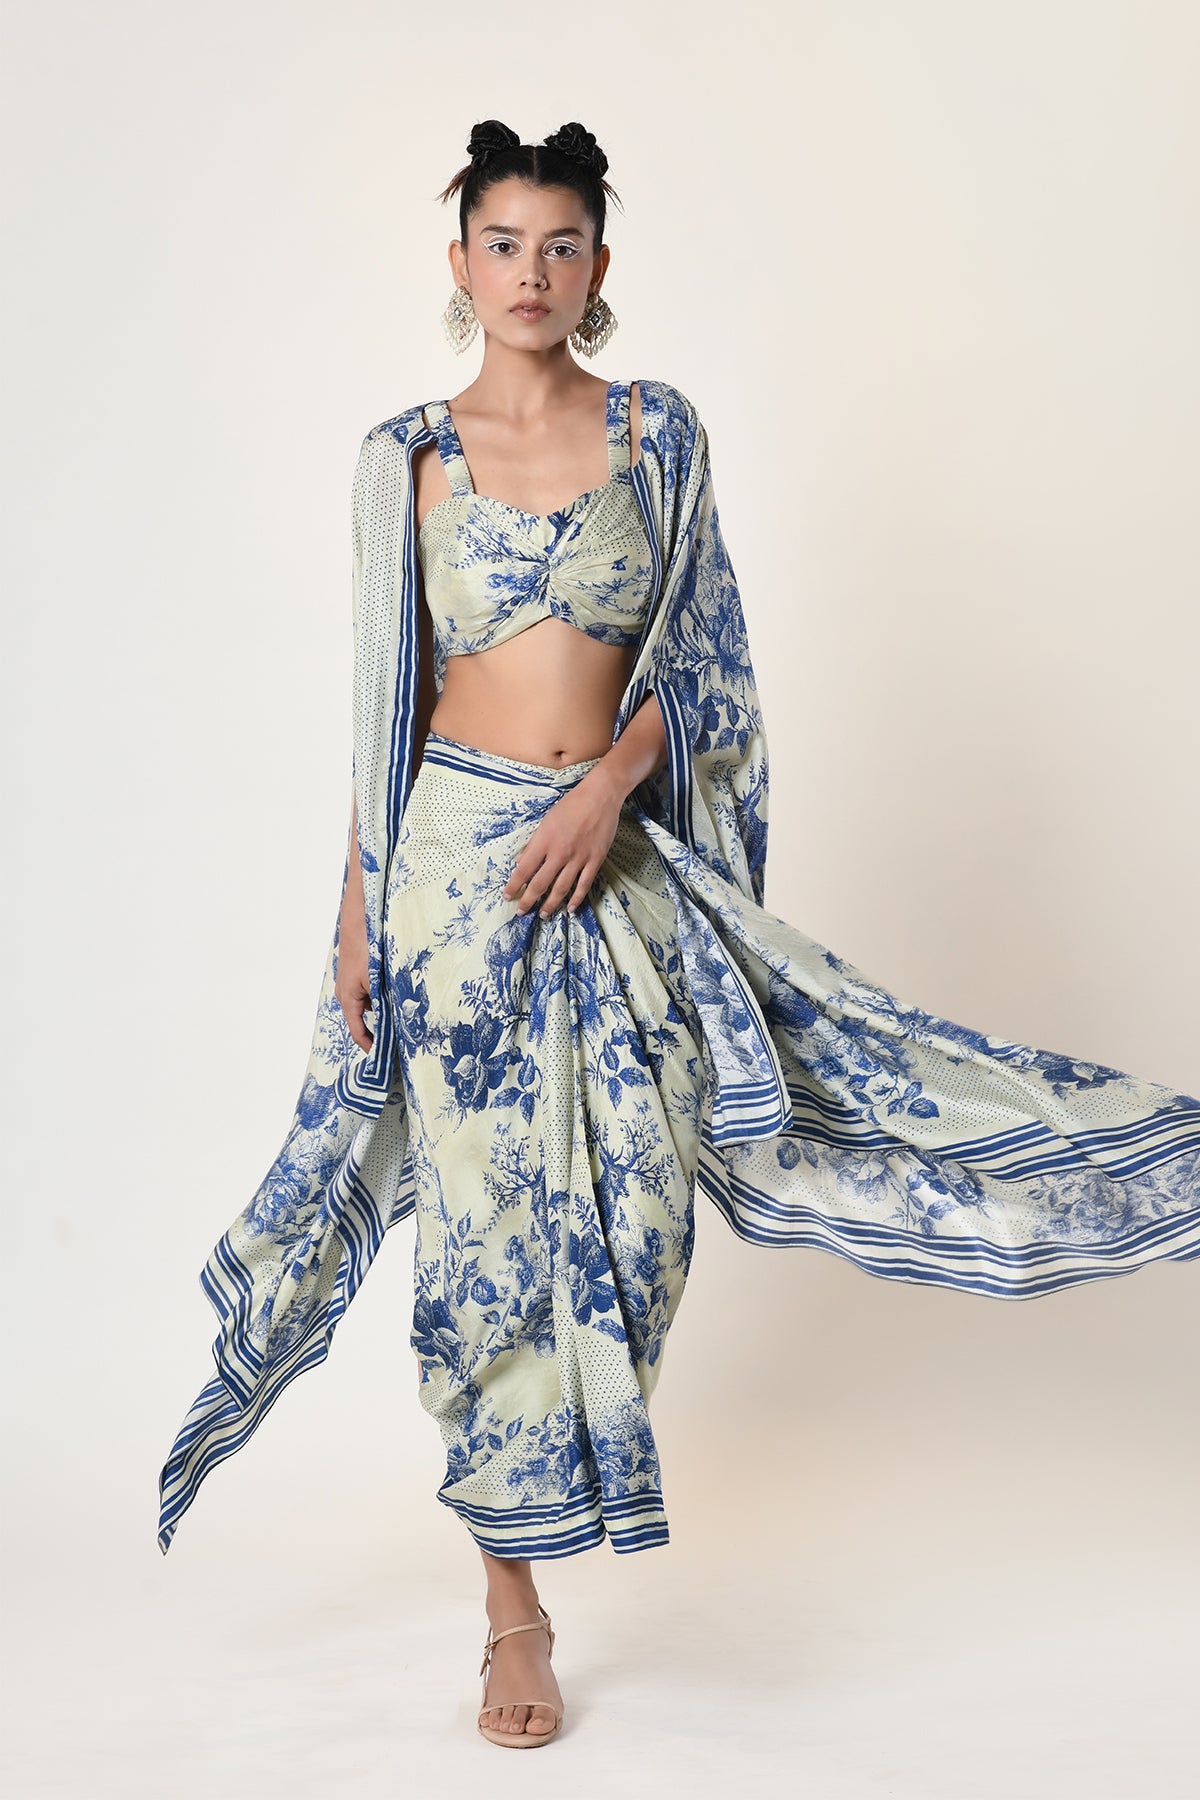 Co - ord set with draped skirt